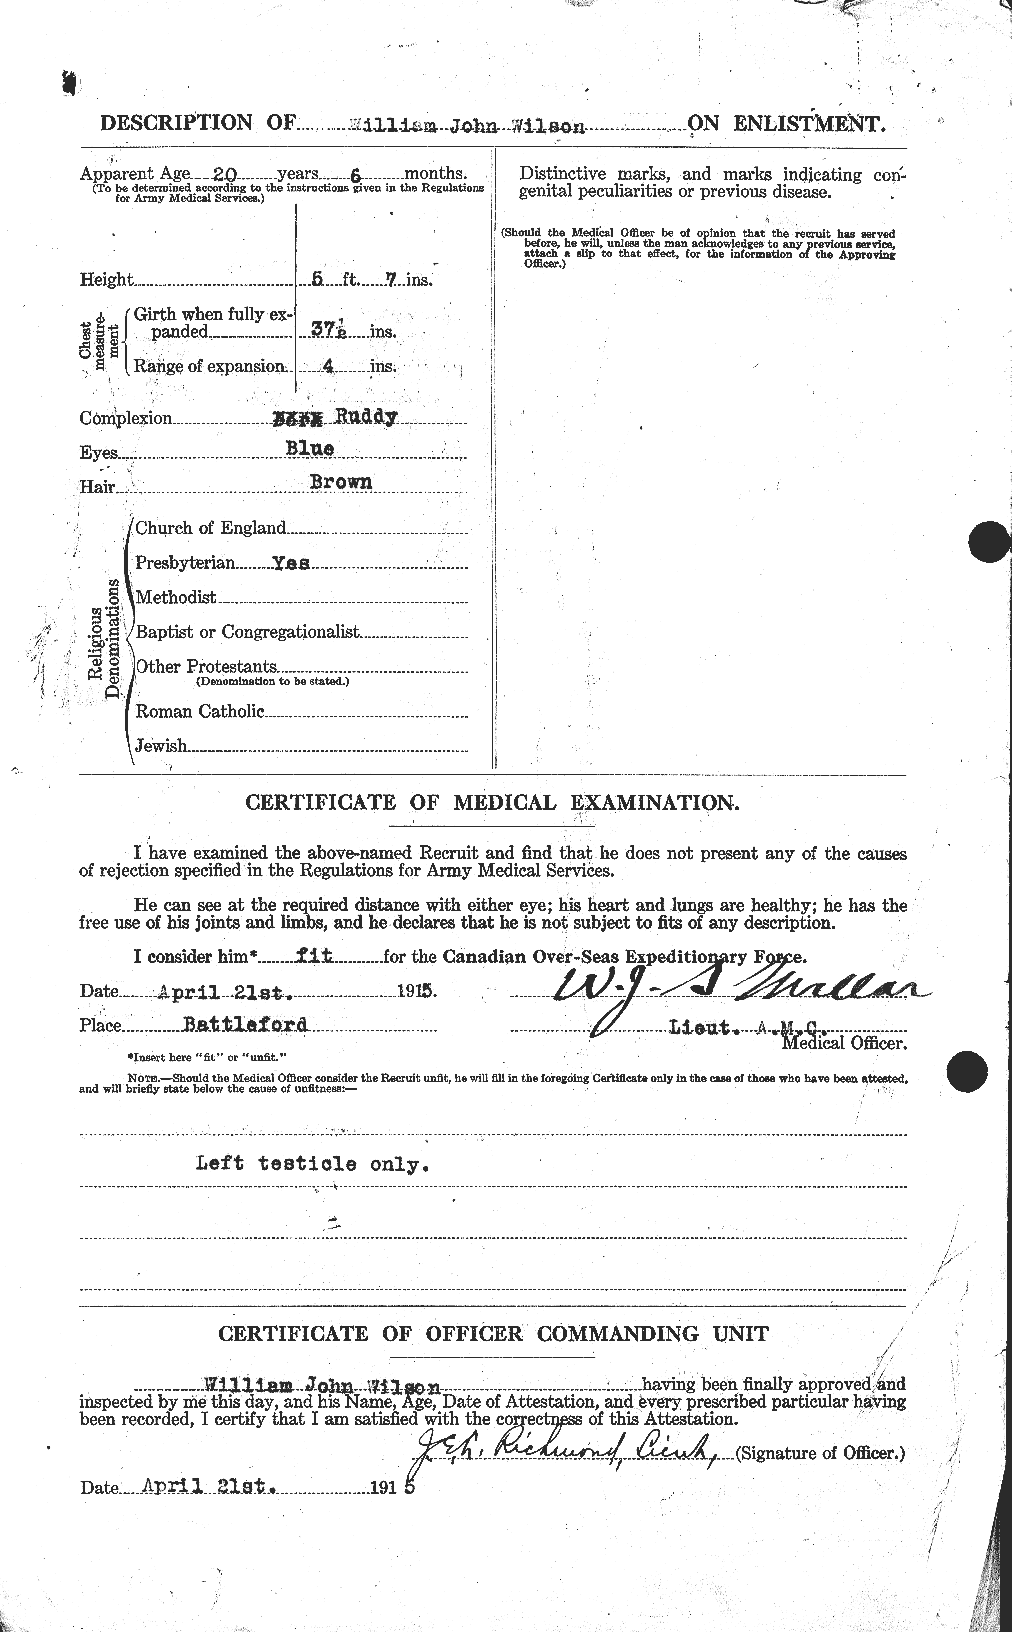 Personnel Records of the First World War - CEF 682063b